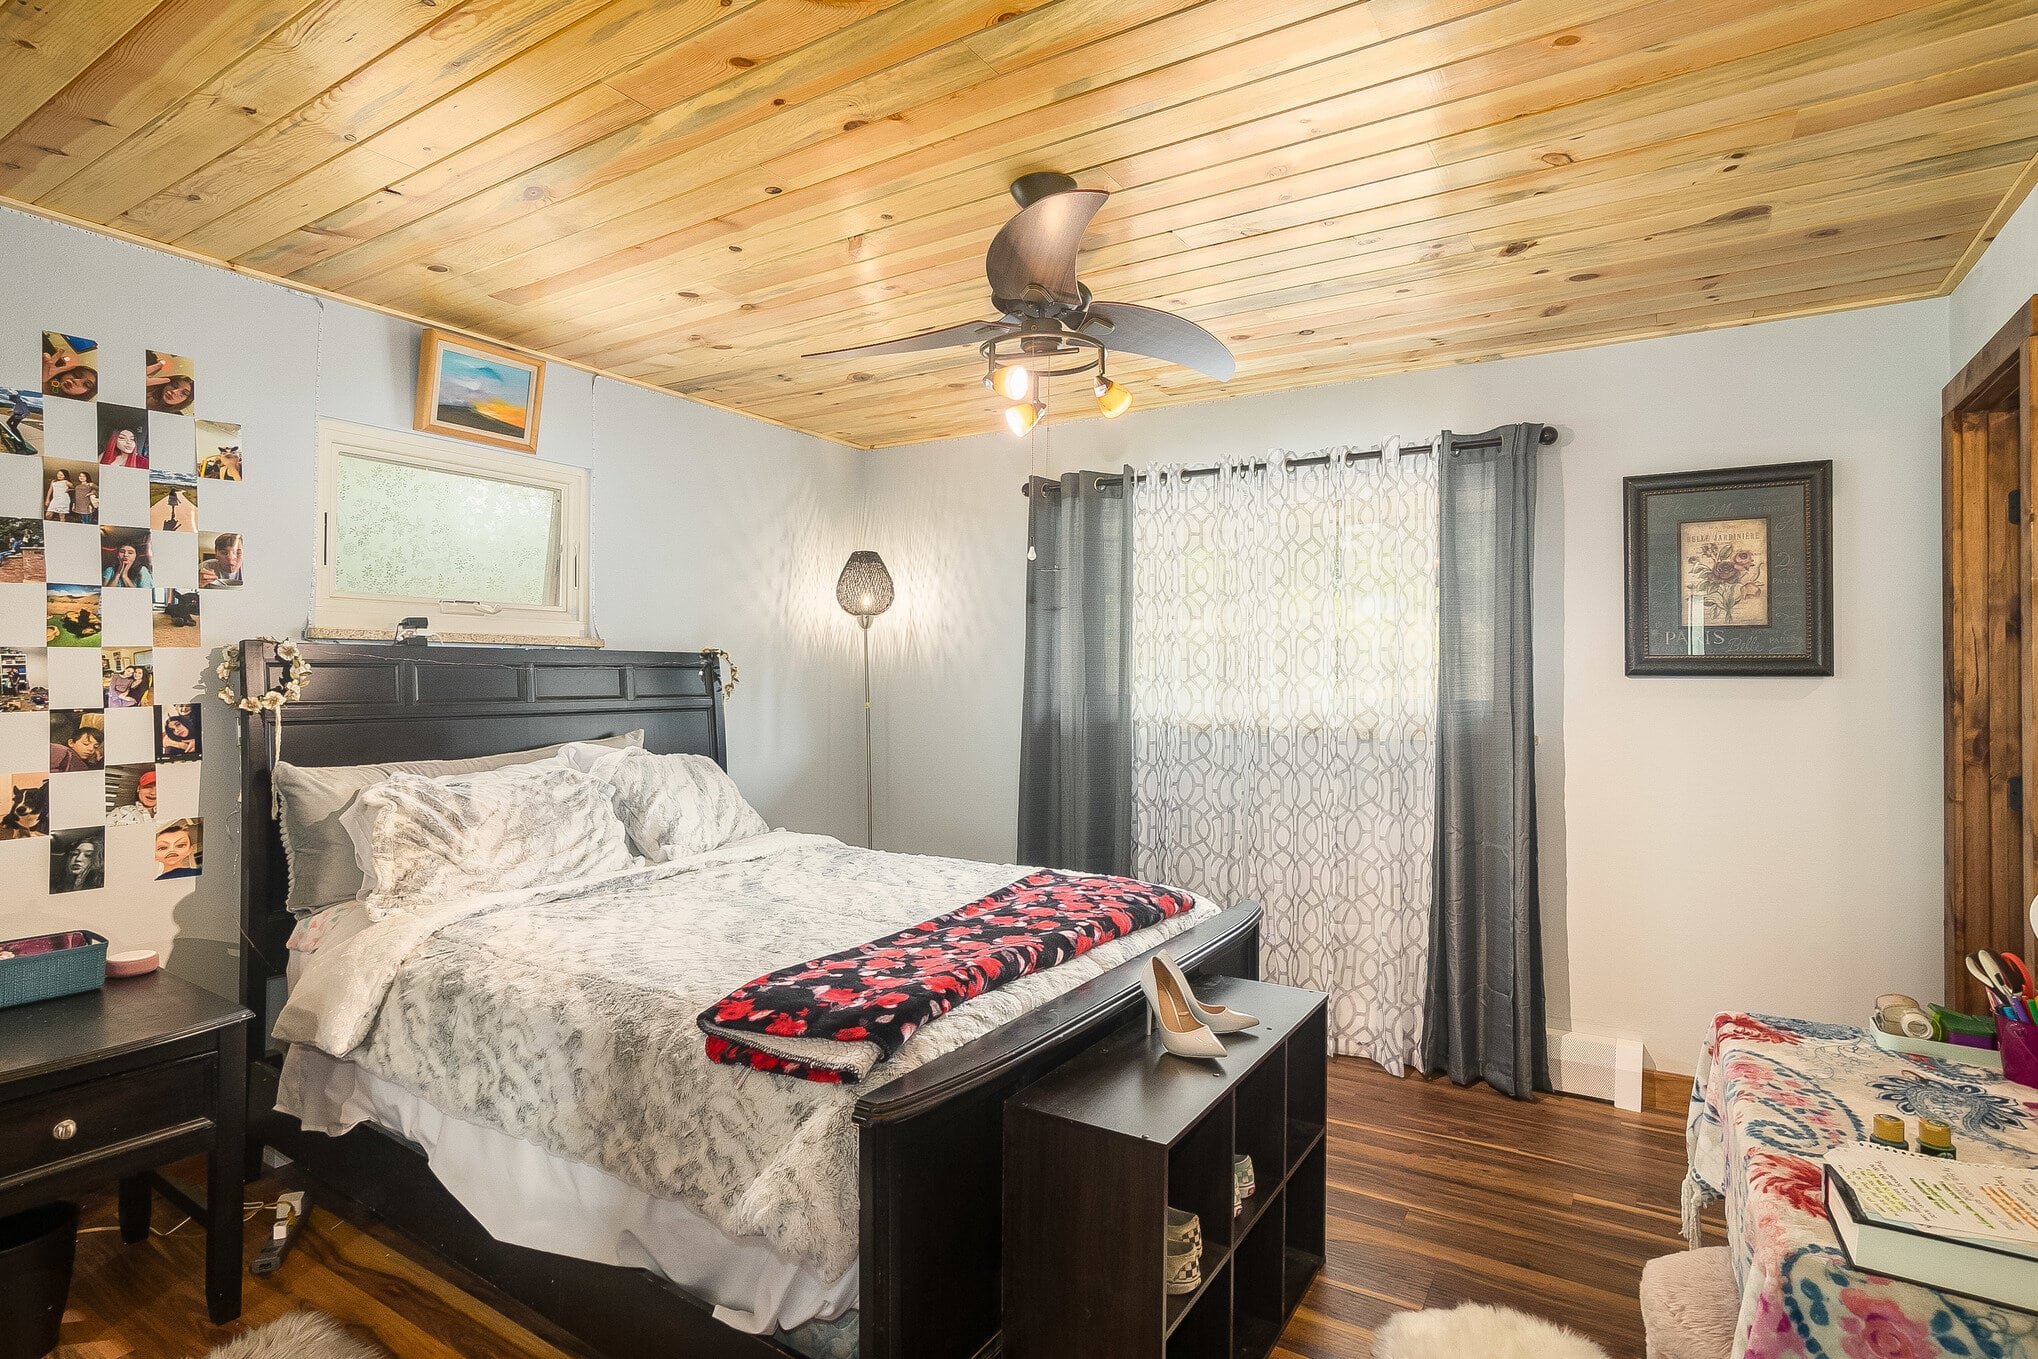 Farmhouse bedroom with wooden accents